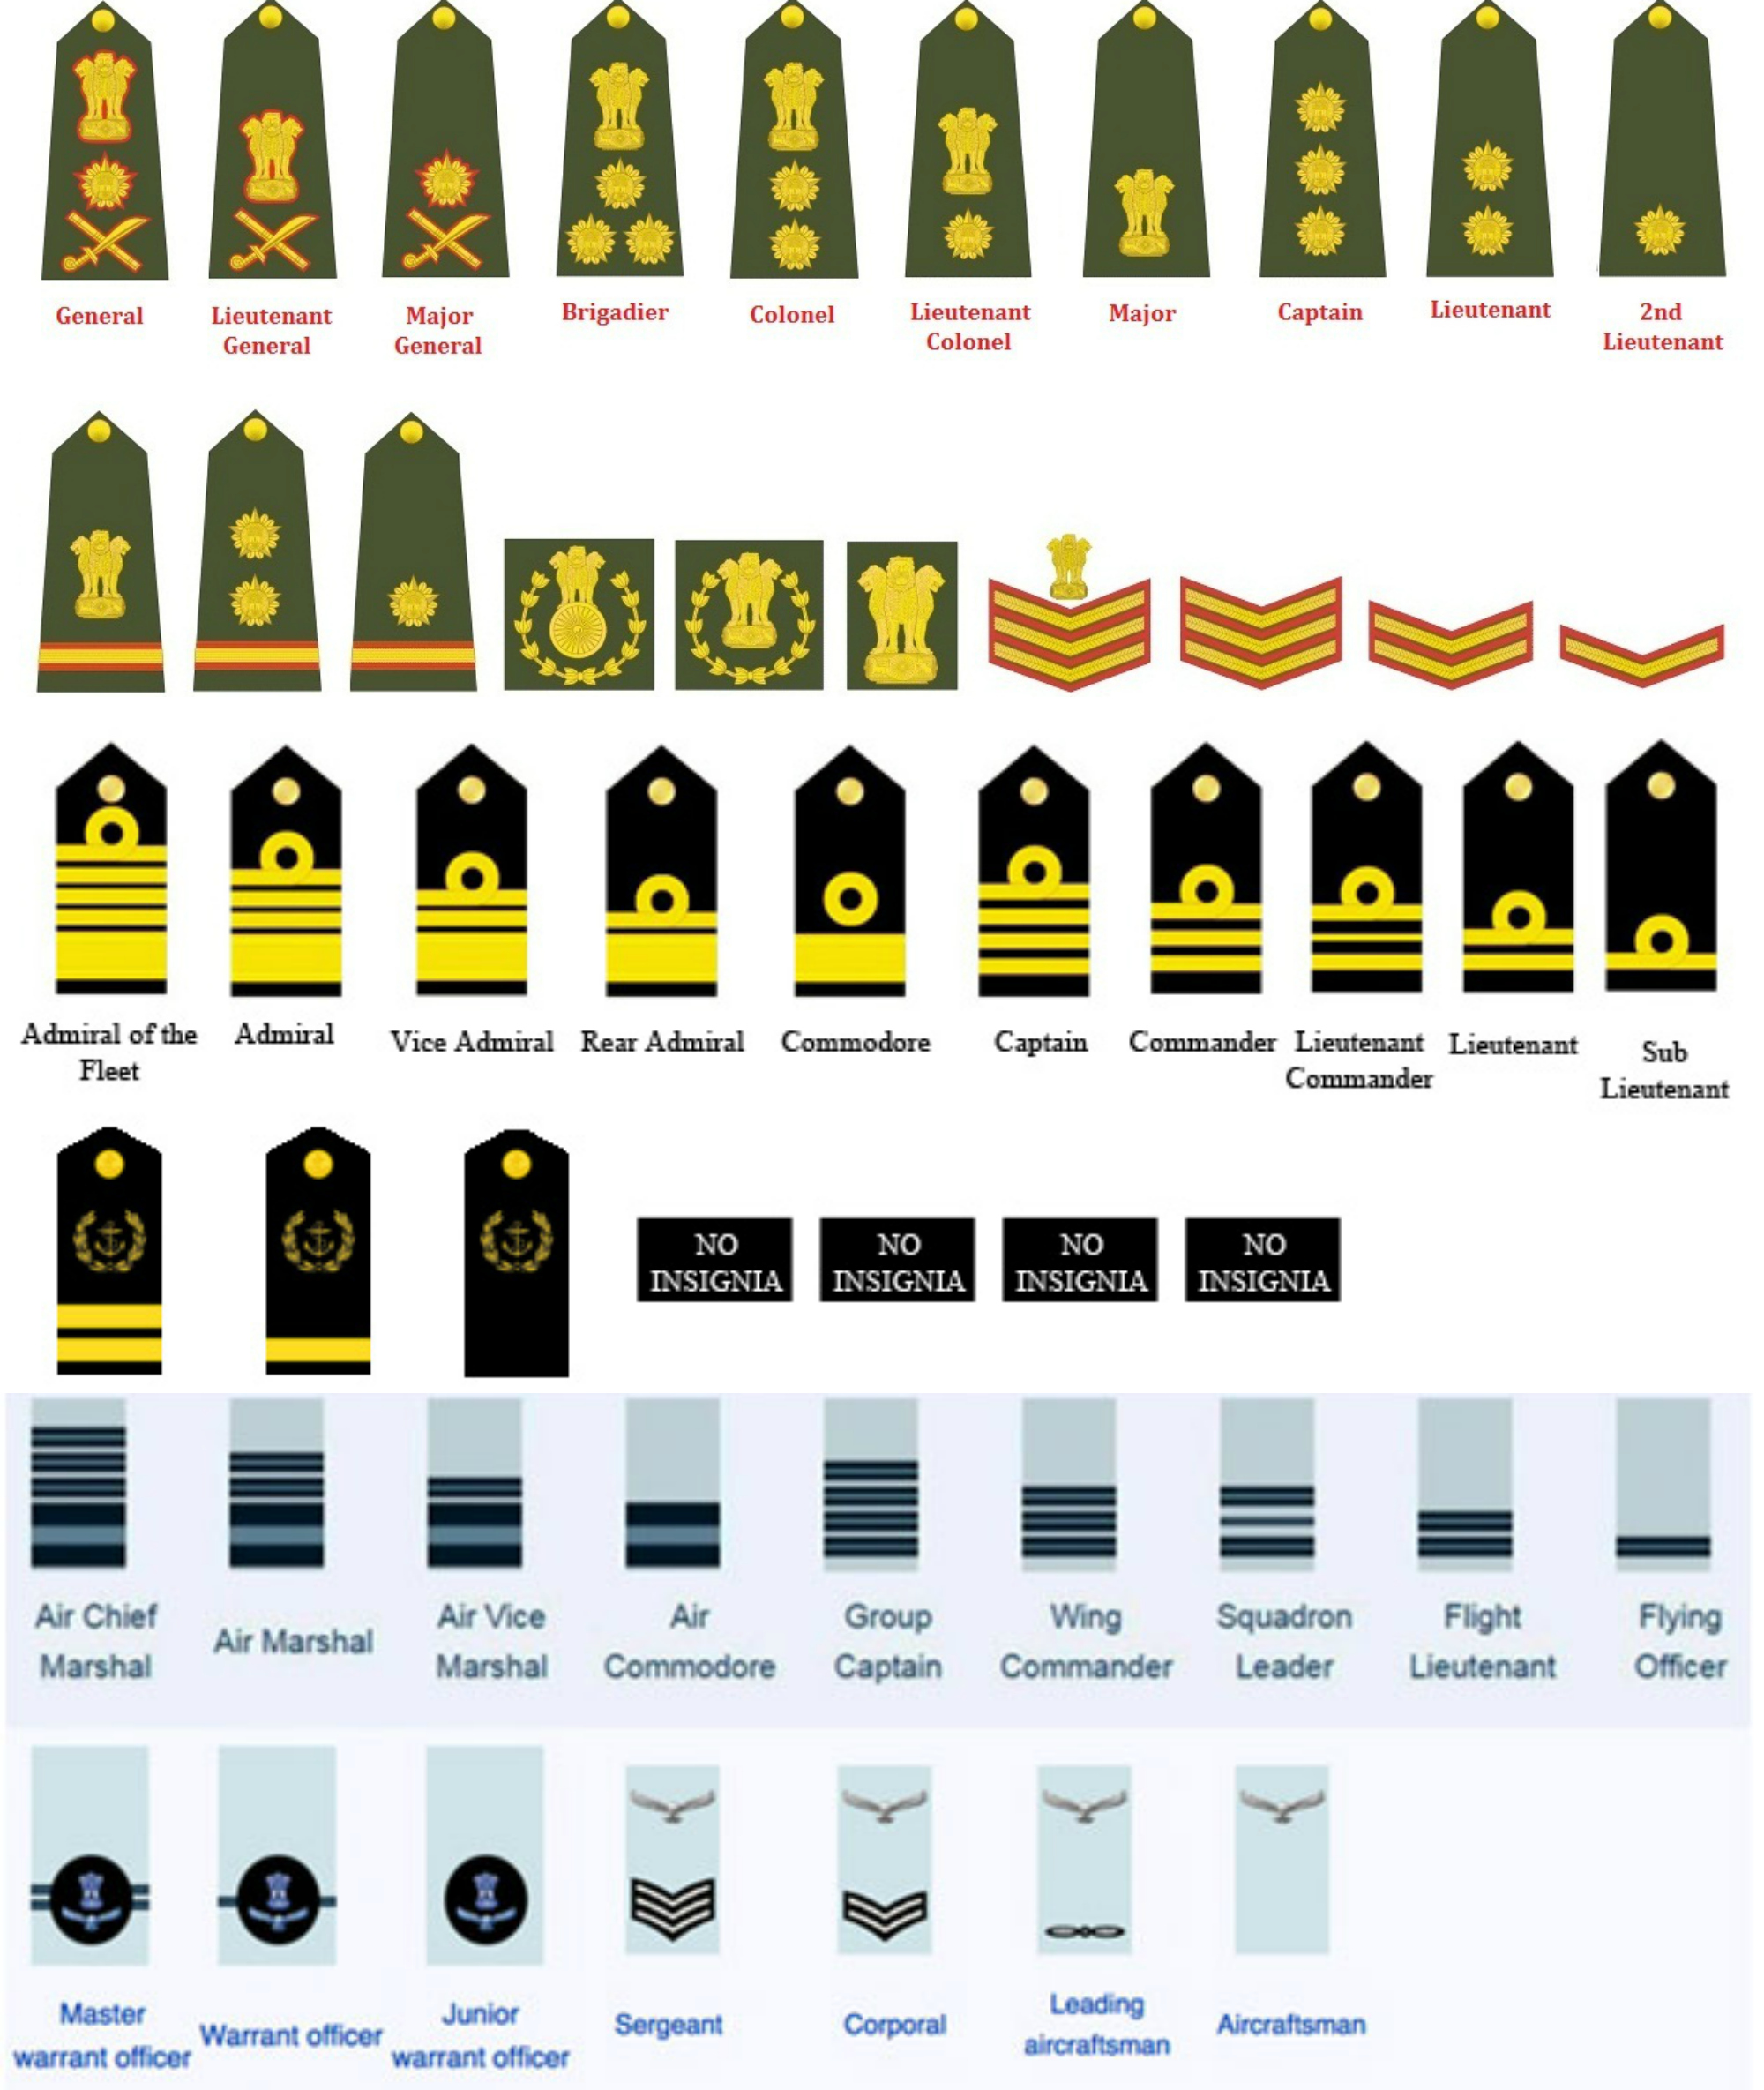 Equivalent Officers Rank of Indian Armed Forces Army Navy Air Force